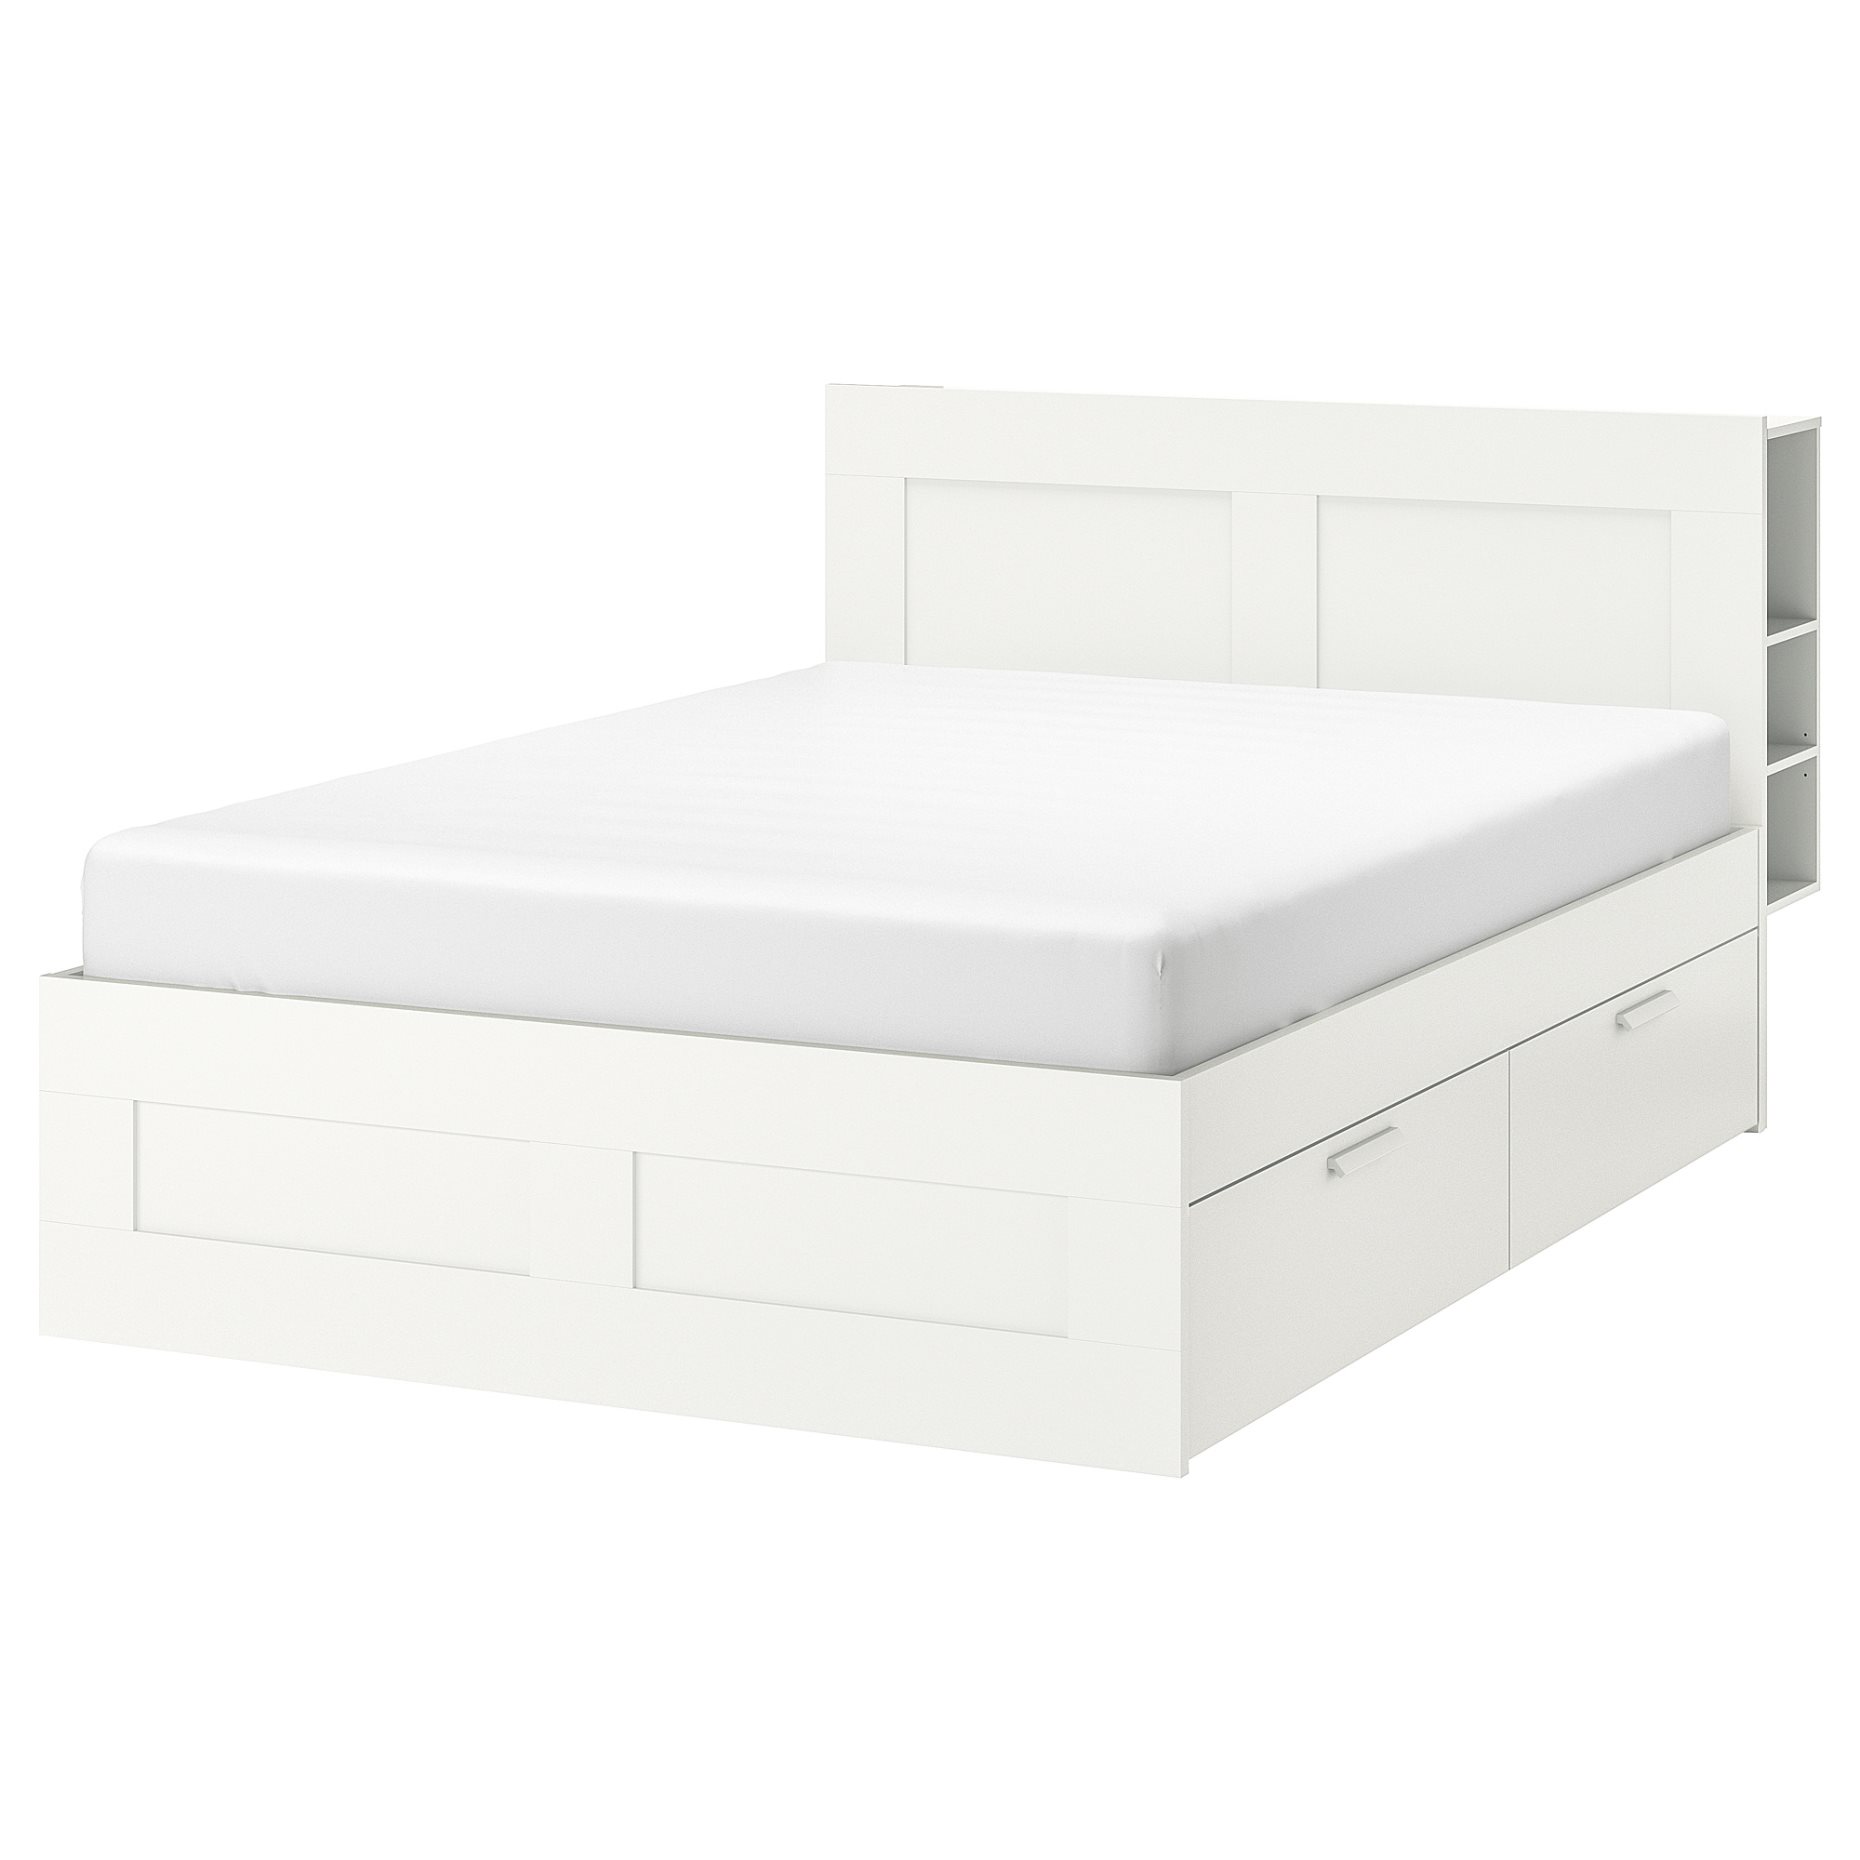 BRIMNES, bed frame with storage and headboard, 160X200 cm, 691.574.56